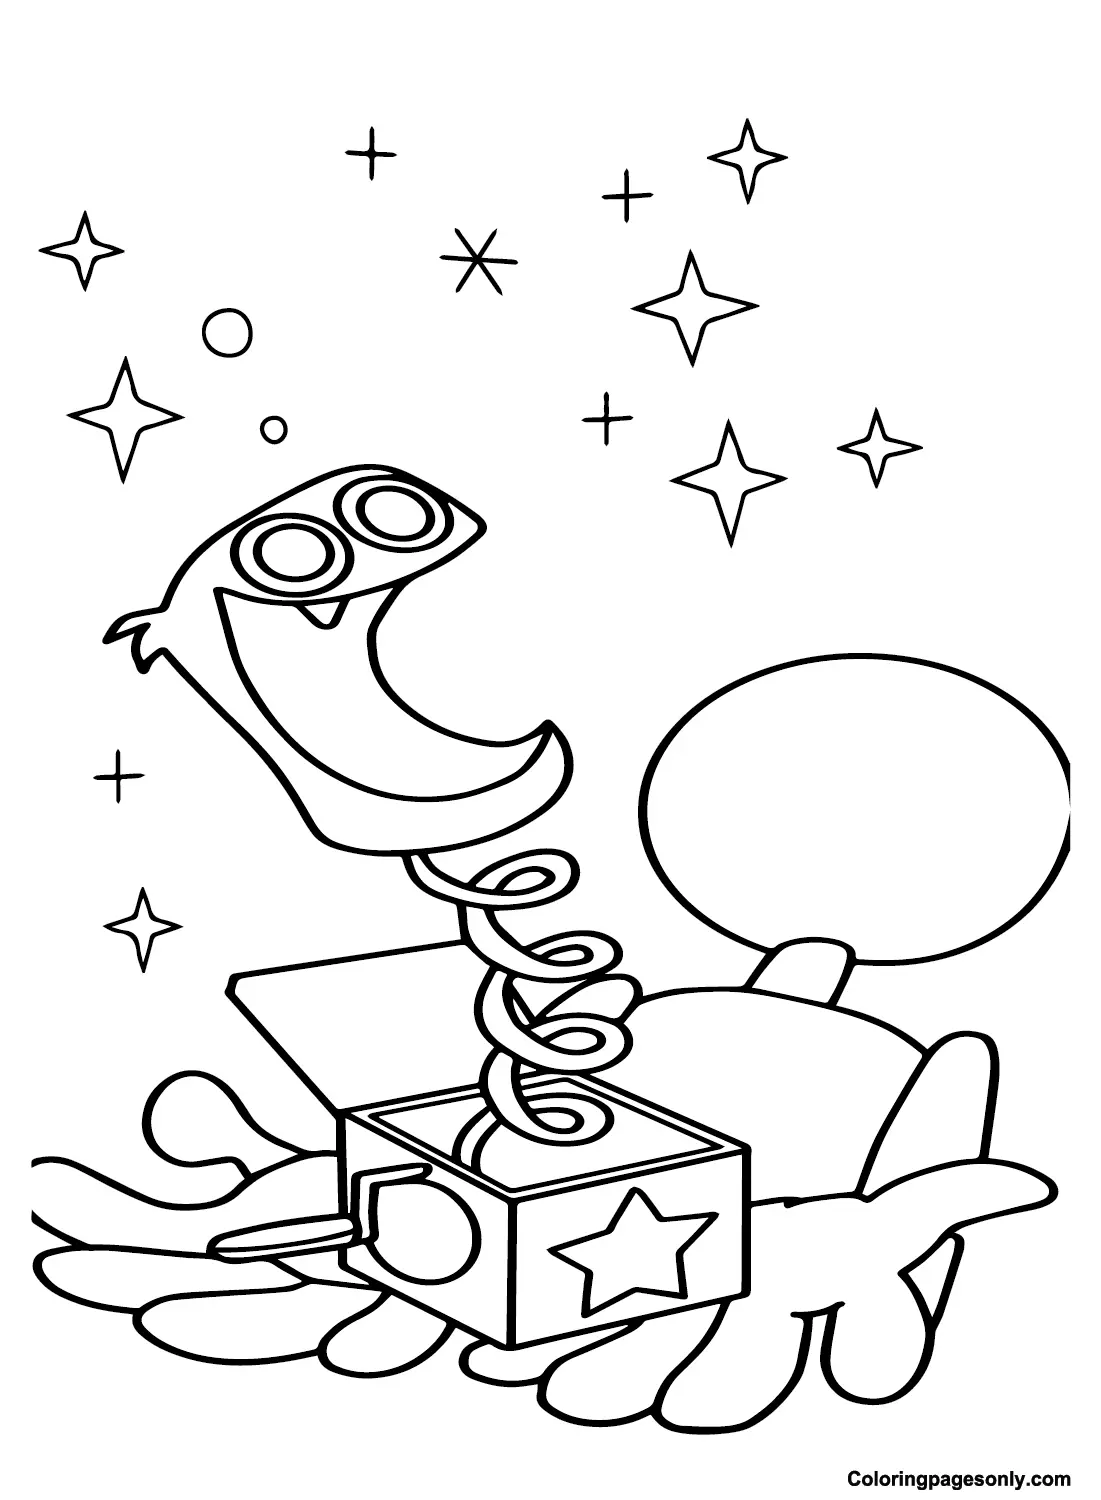 Boxy Boo Coloring Pages